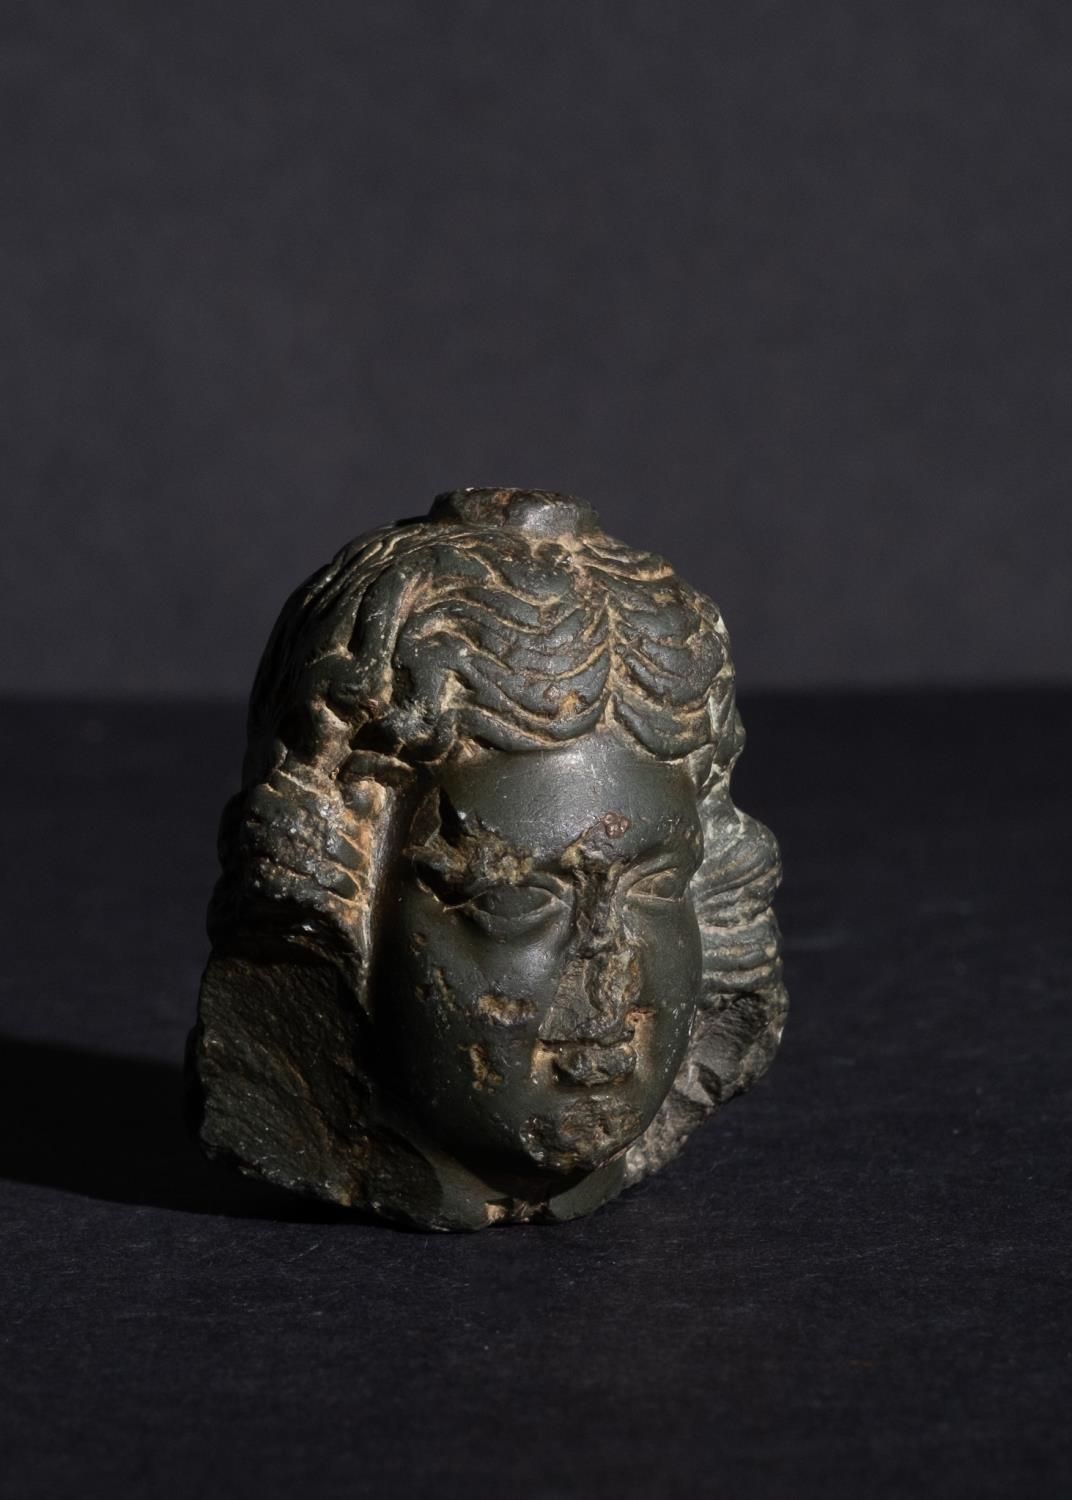 LATE ROMAN PERIOD SCHIST STONE HEAD BUST OF A NOBLEMAN 250- 450 AD 公元250-450年的罗马&hellip;